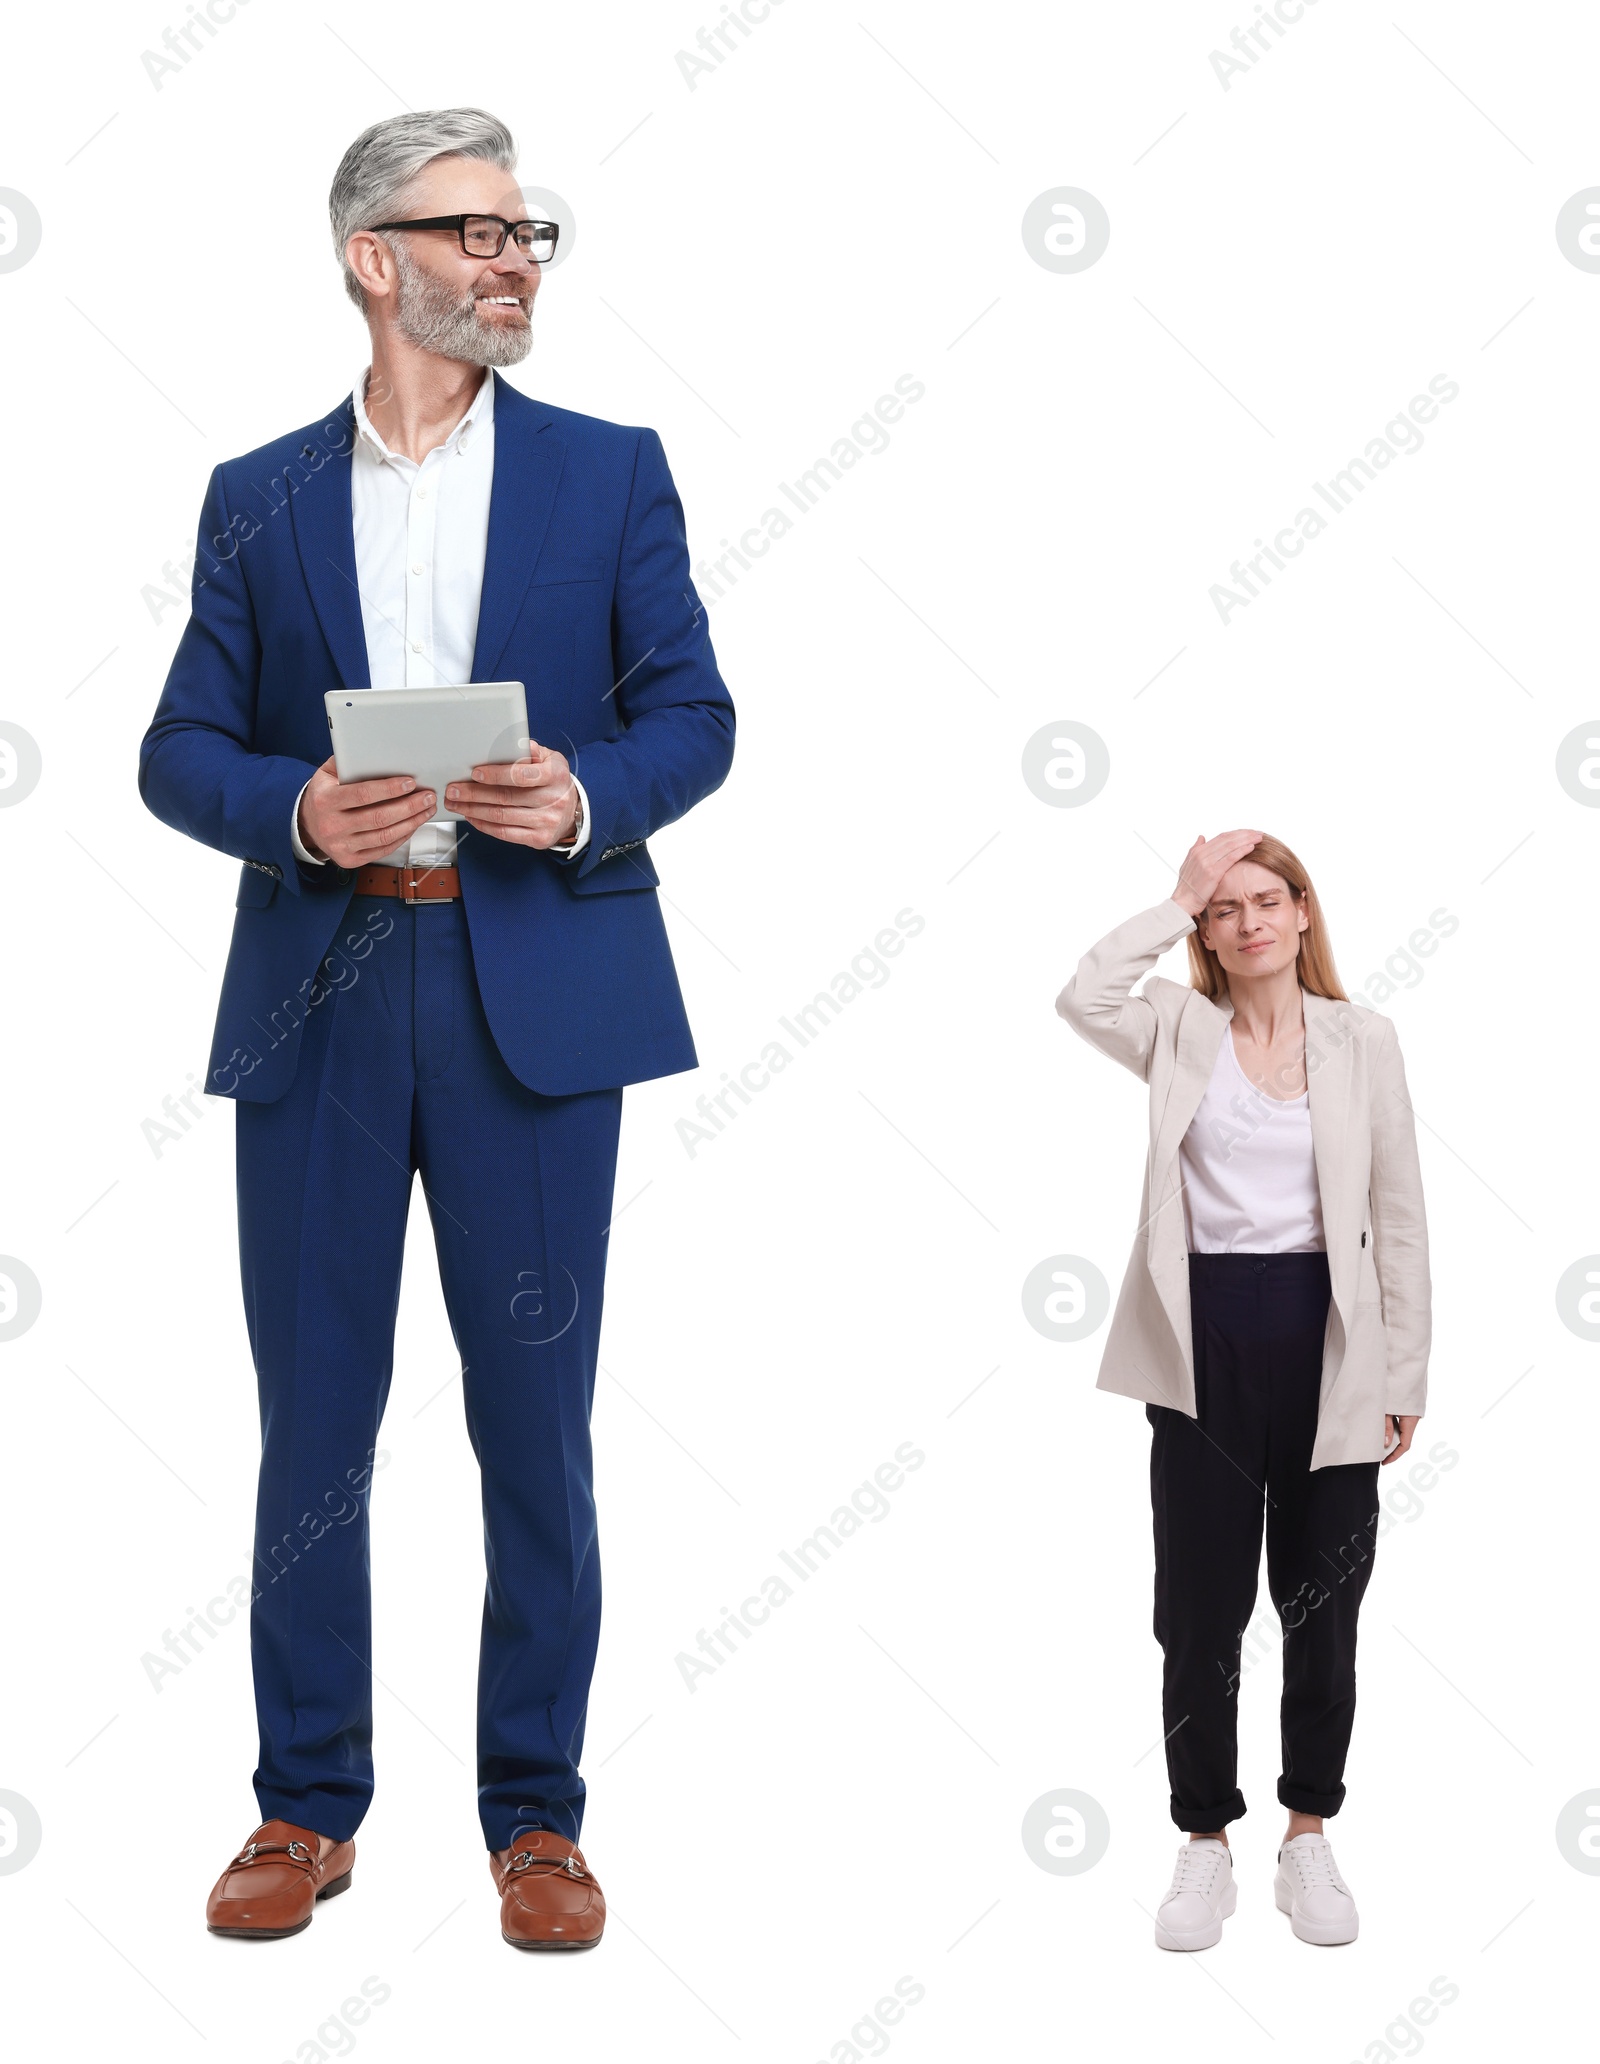 Image of Happy big man and emotional small woman on white background